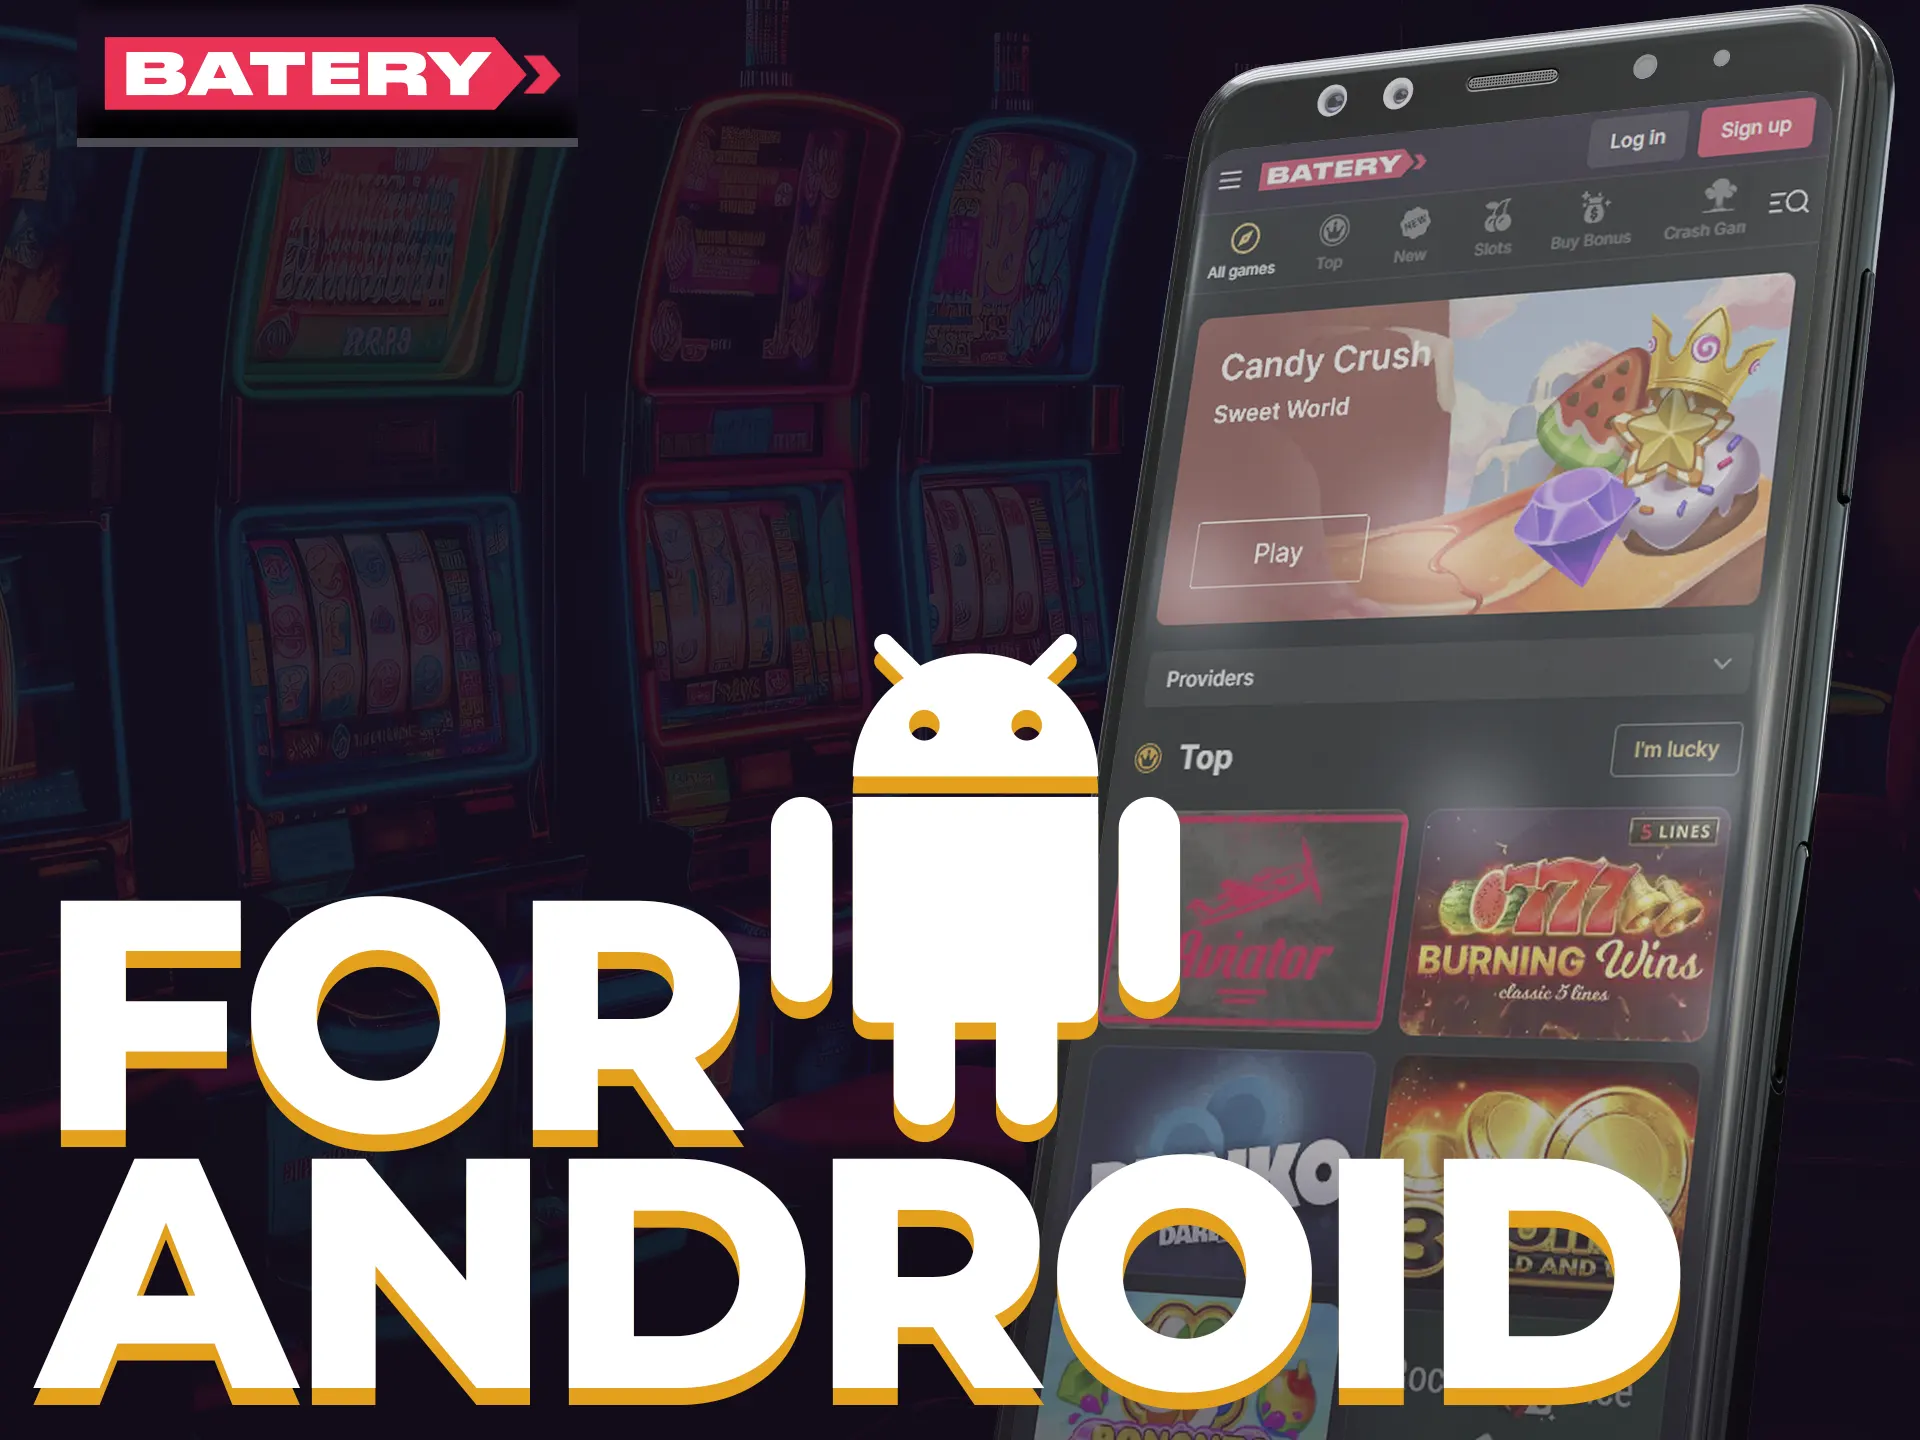 Use Batery Android app to improve your gambling experience.